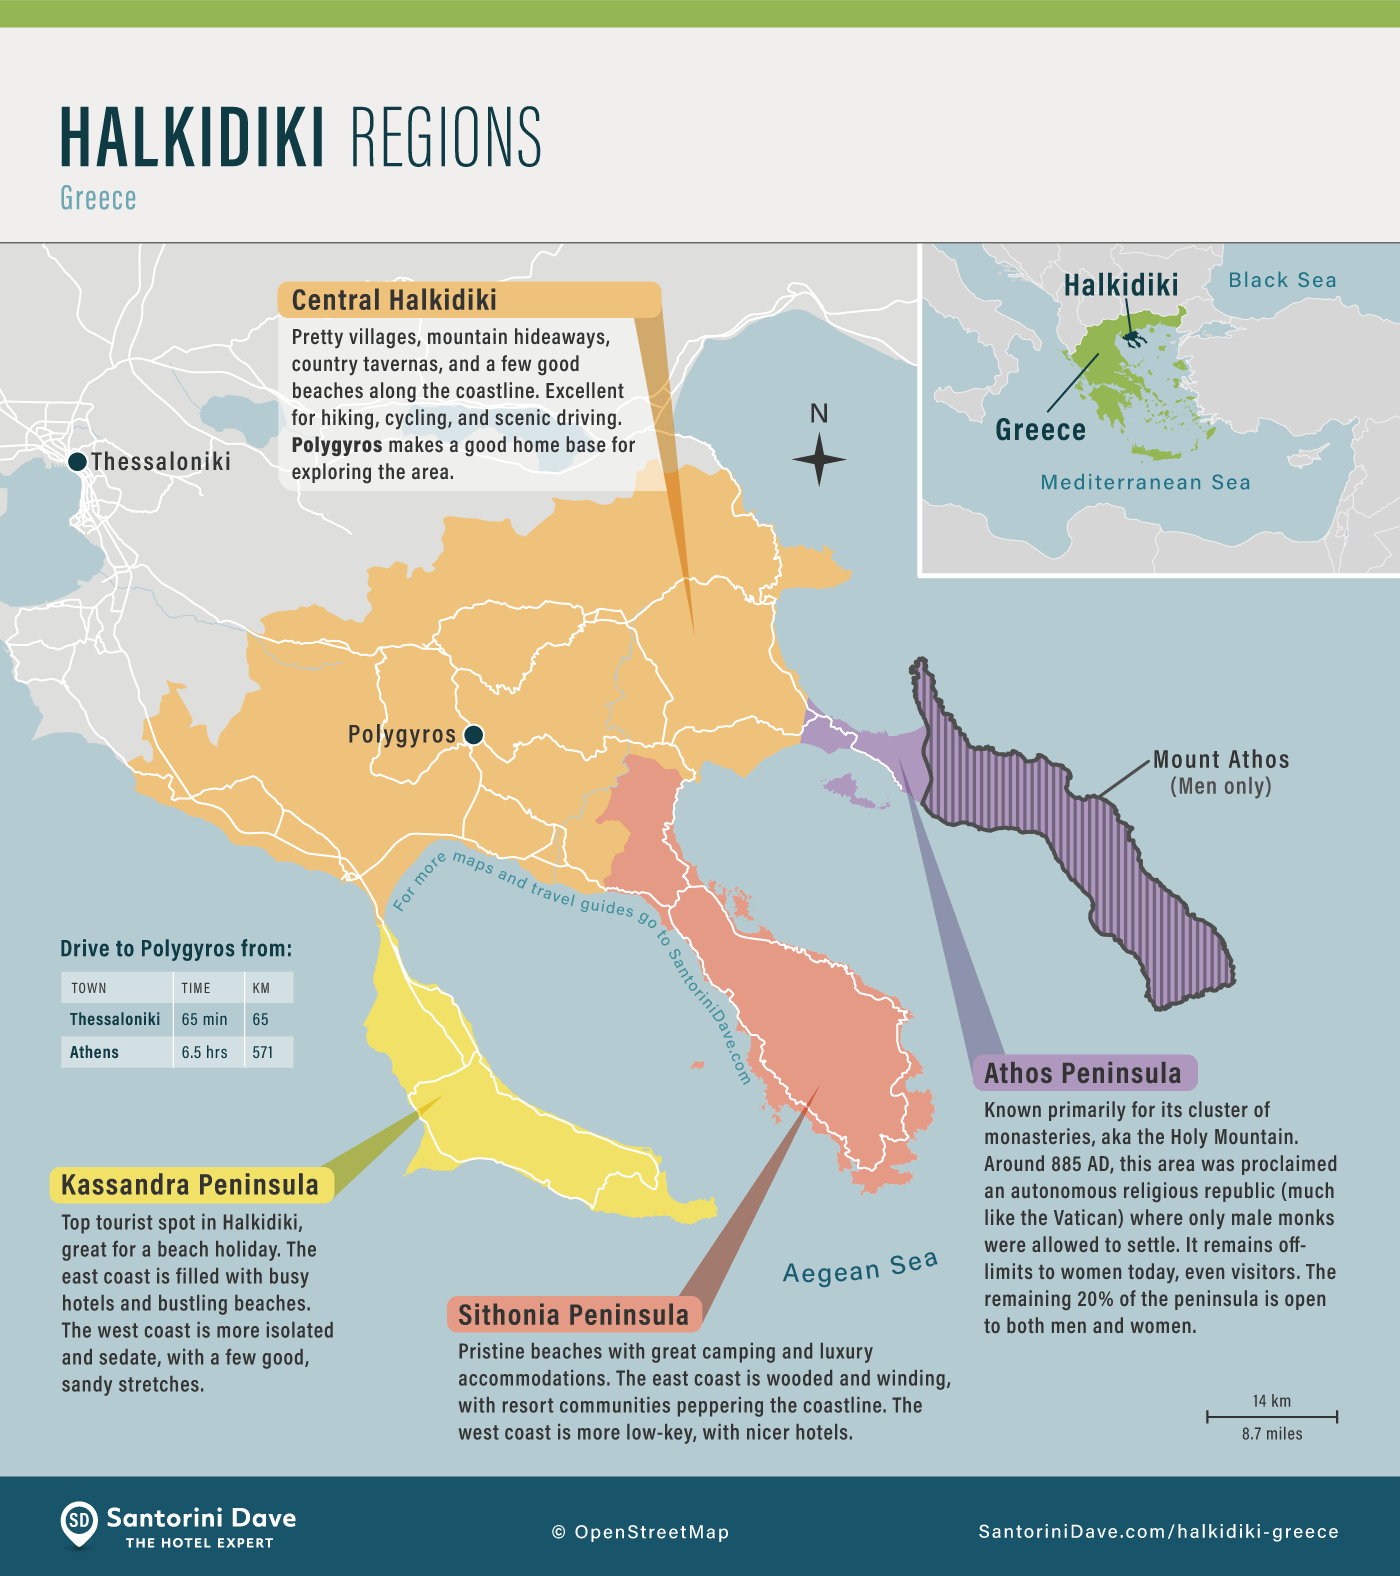 Map of the Halkidiki region in northern Greece